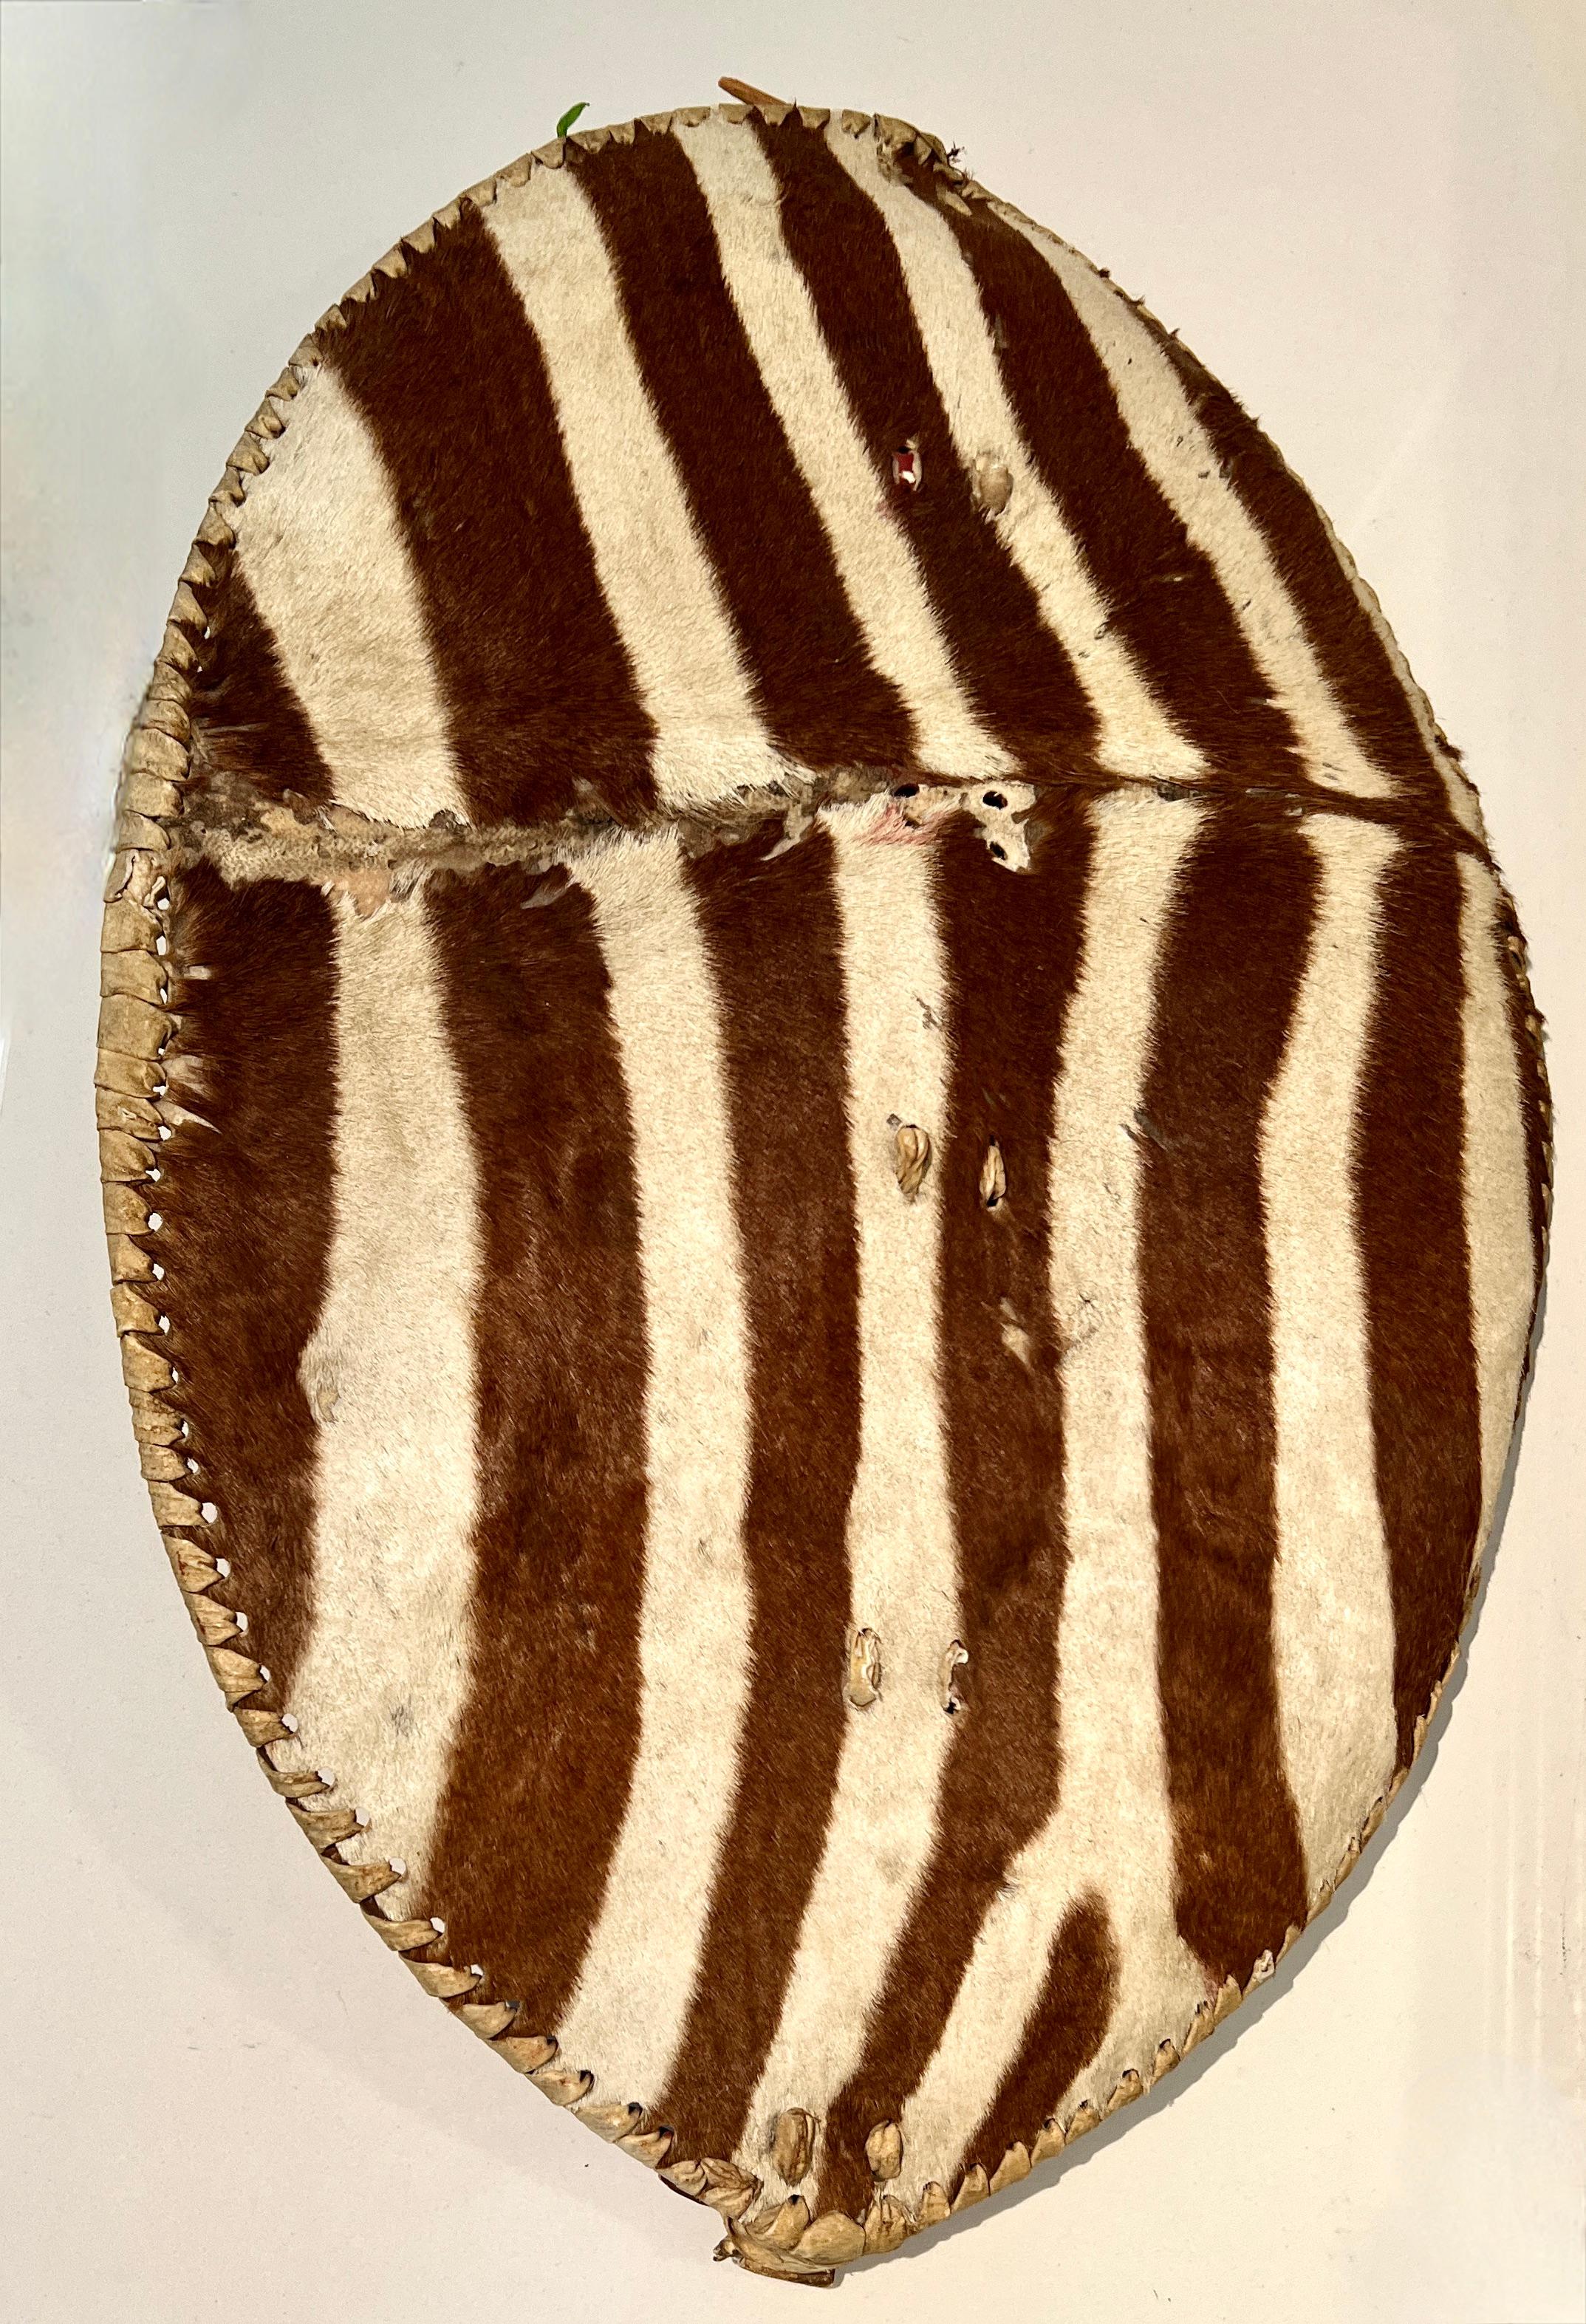 An original Zulu Shield made of Zebra Hide and lashed with woven leather.  The inside back is made of wood, and handle portion was cured, covered and painted red - there are some condition issues with the handle side, however the handle works well